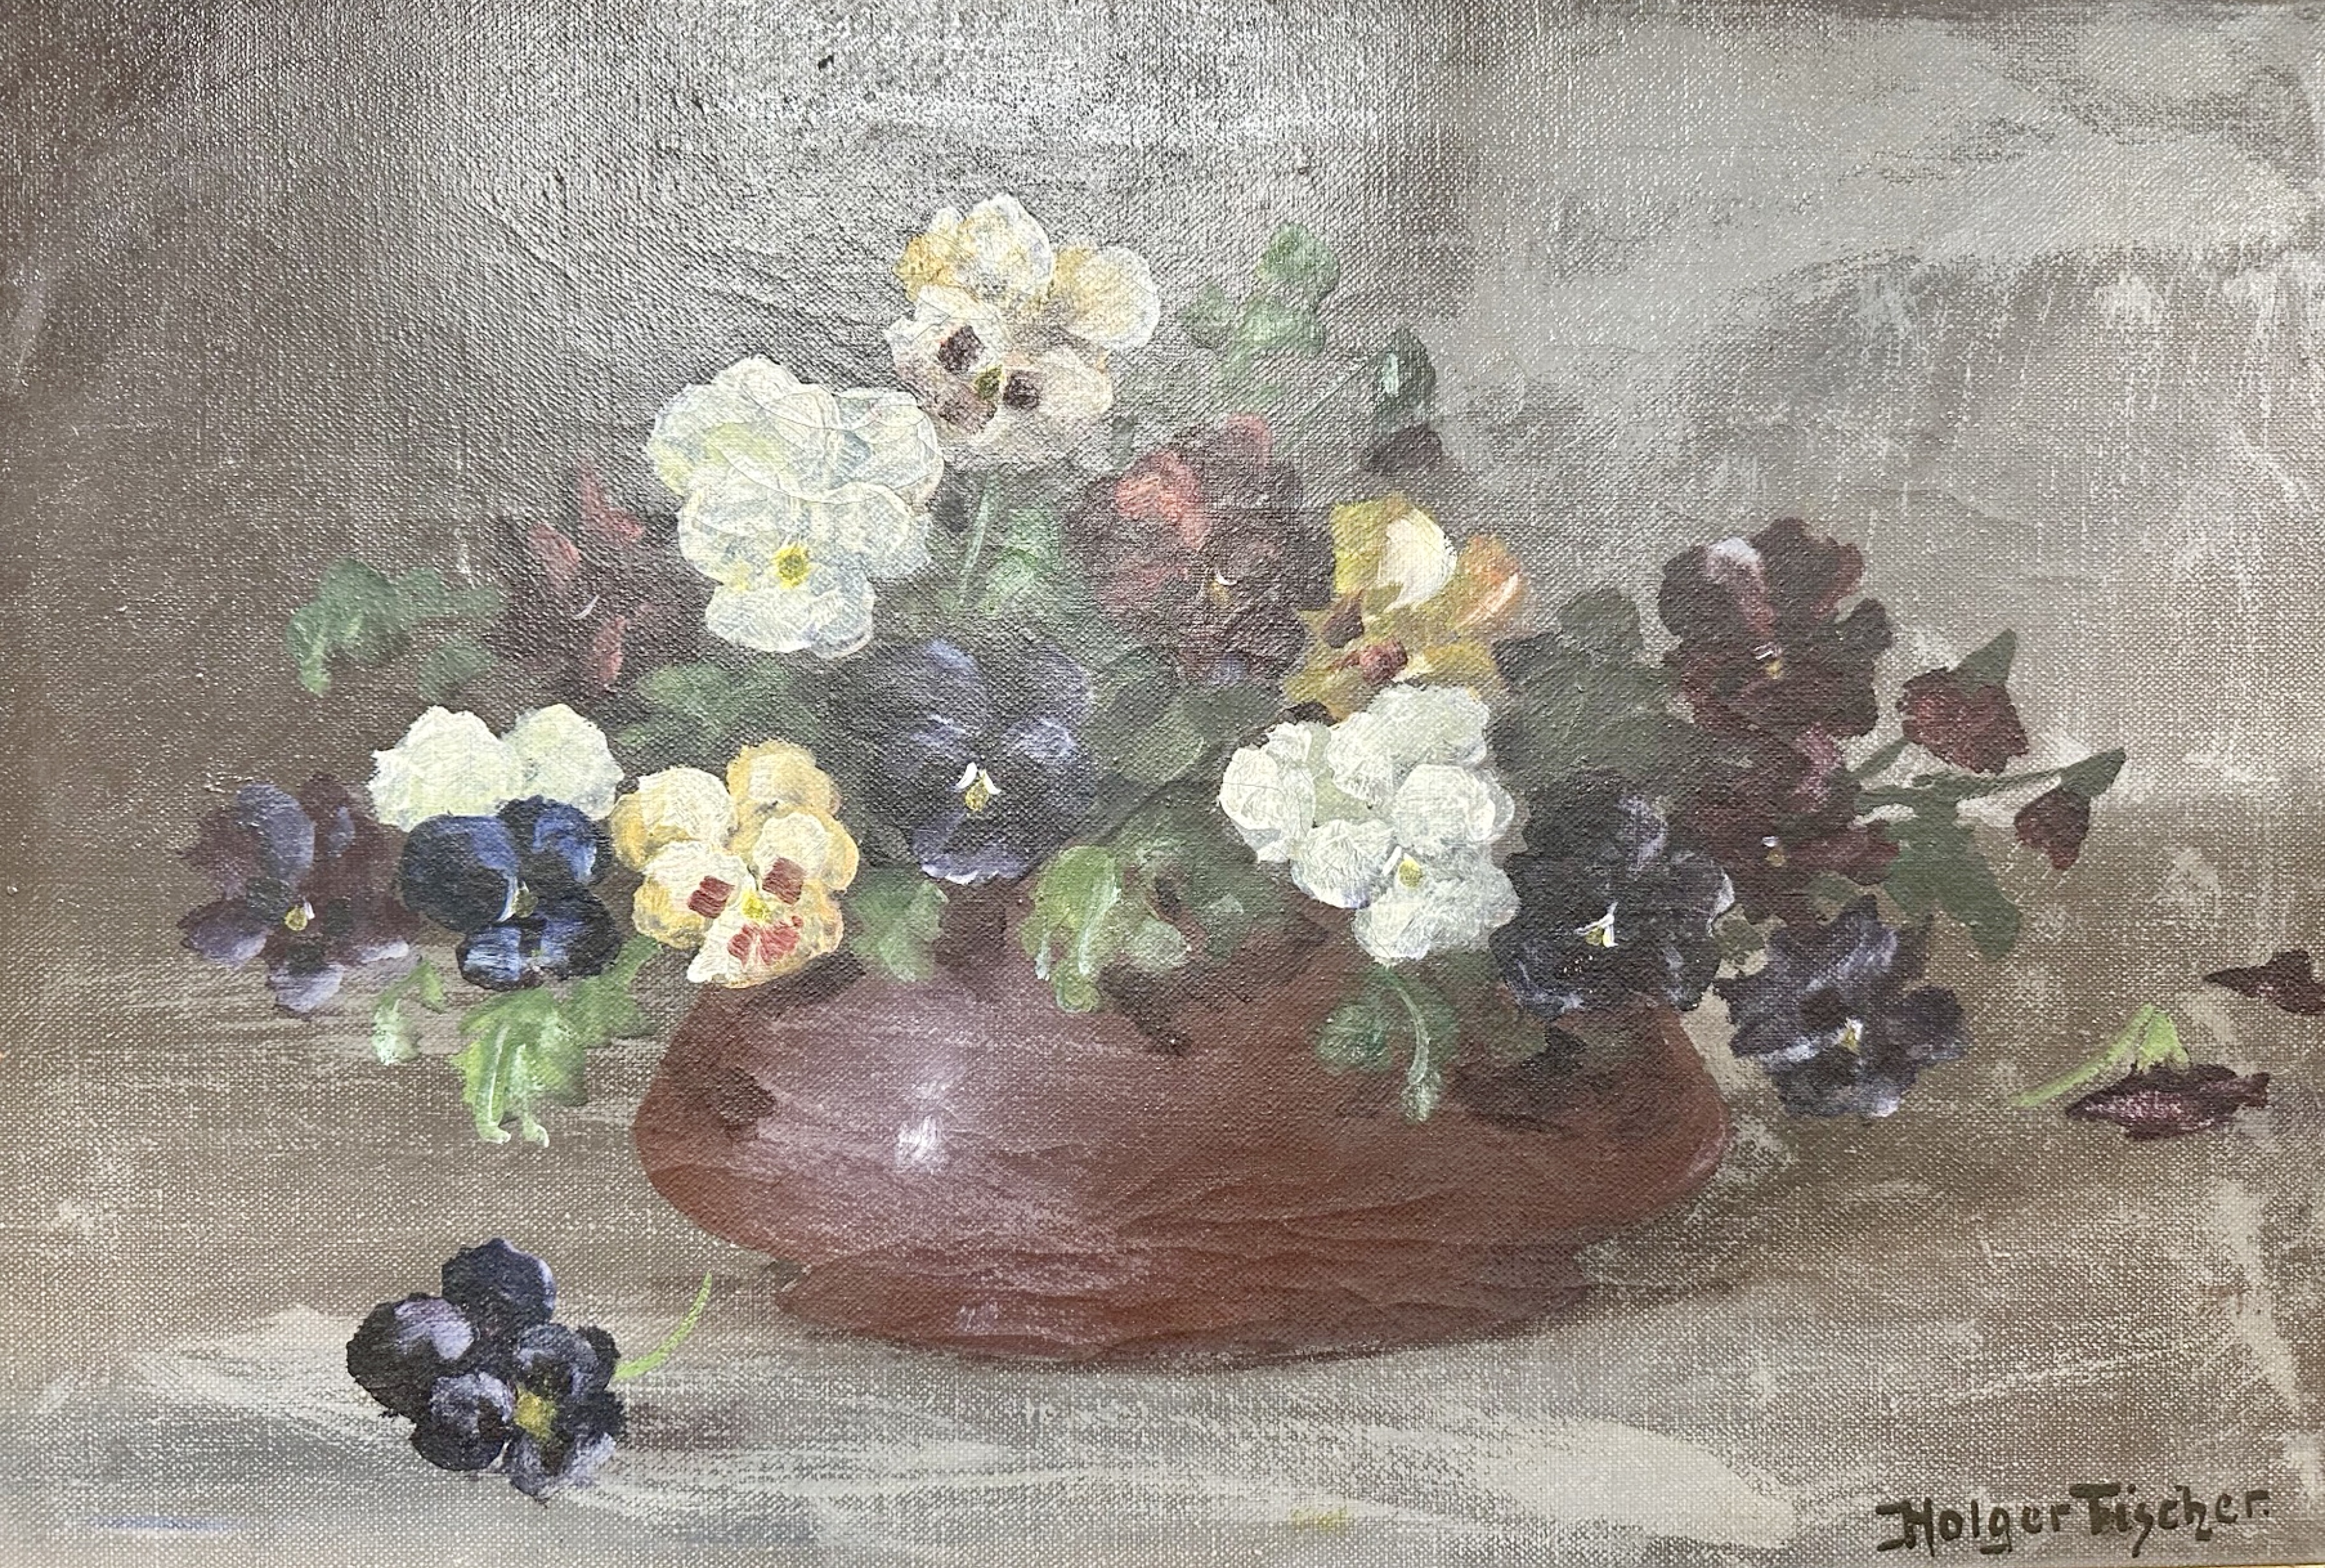 Holger Fischer : Still life with flowers in a vase, oil on canvas, 46 cm x 30 cm.